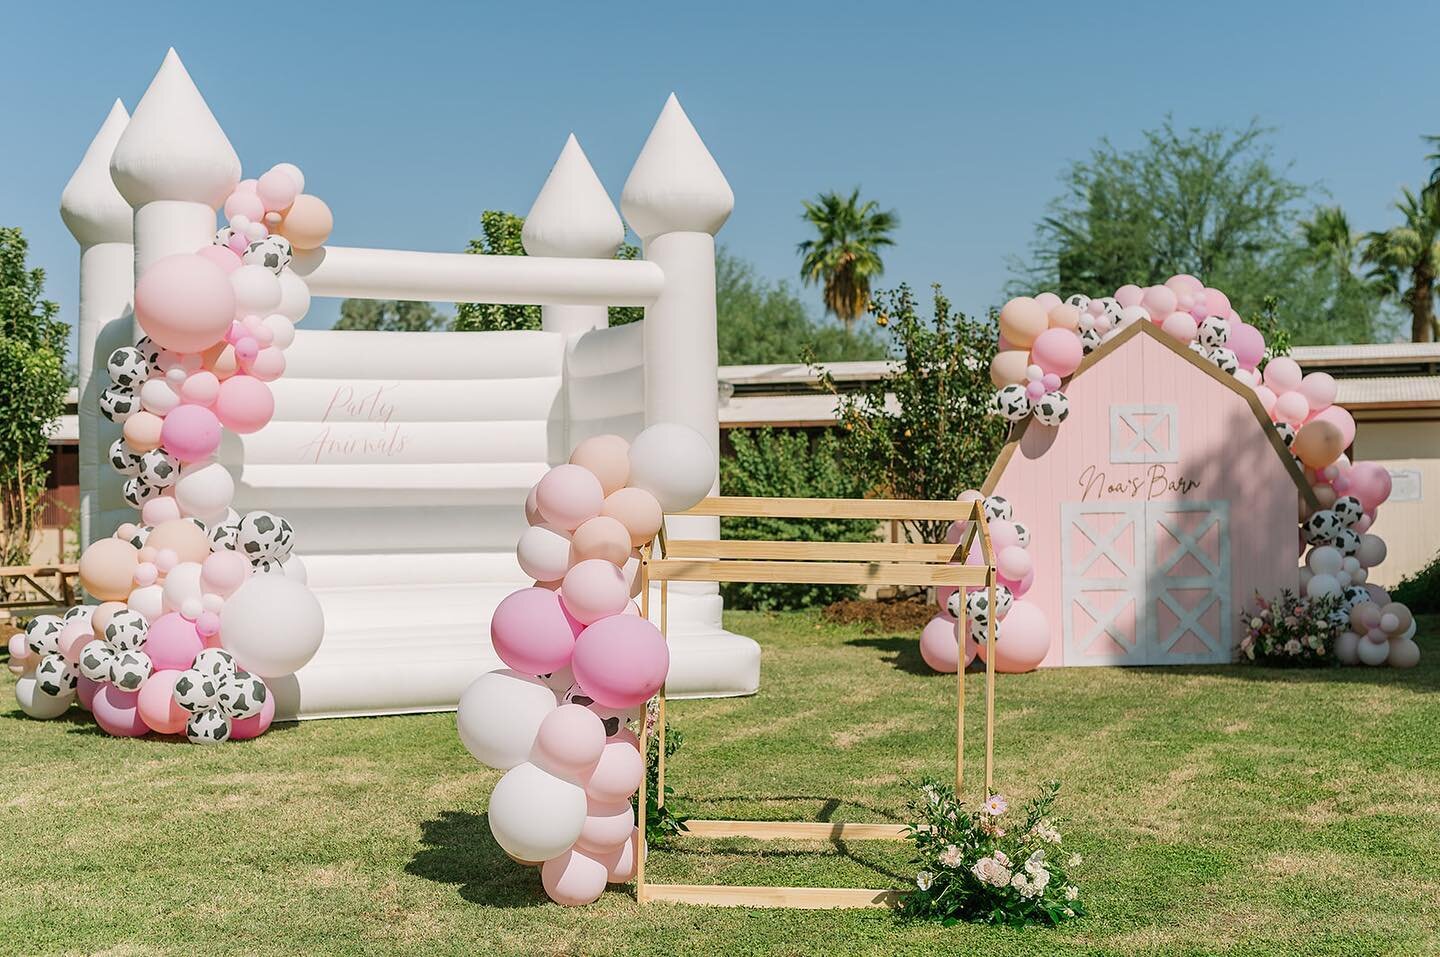 Party inspo, coming right up 🤩
.
.
Vendors 
Host &amp; Mama - @Brittany_sizemore / Design &amp; Planning - @beijosevents / Photographer - @mandiburnham.photography / Venue - @hunkapiprograms / Rentals - @sweetsalvagerentals / Balloons - @bubblehustl